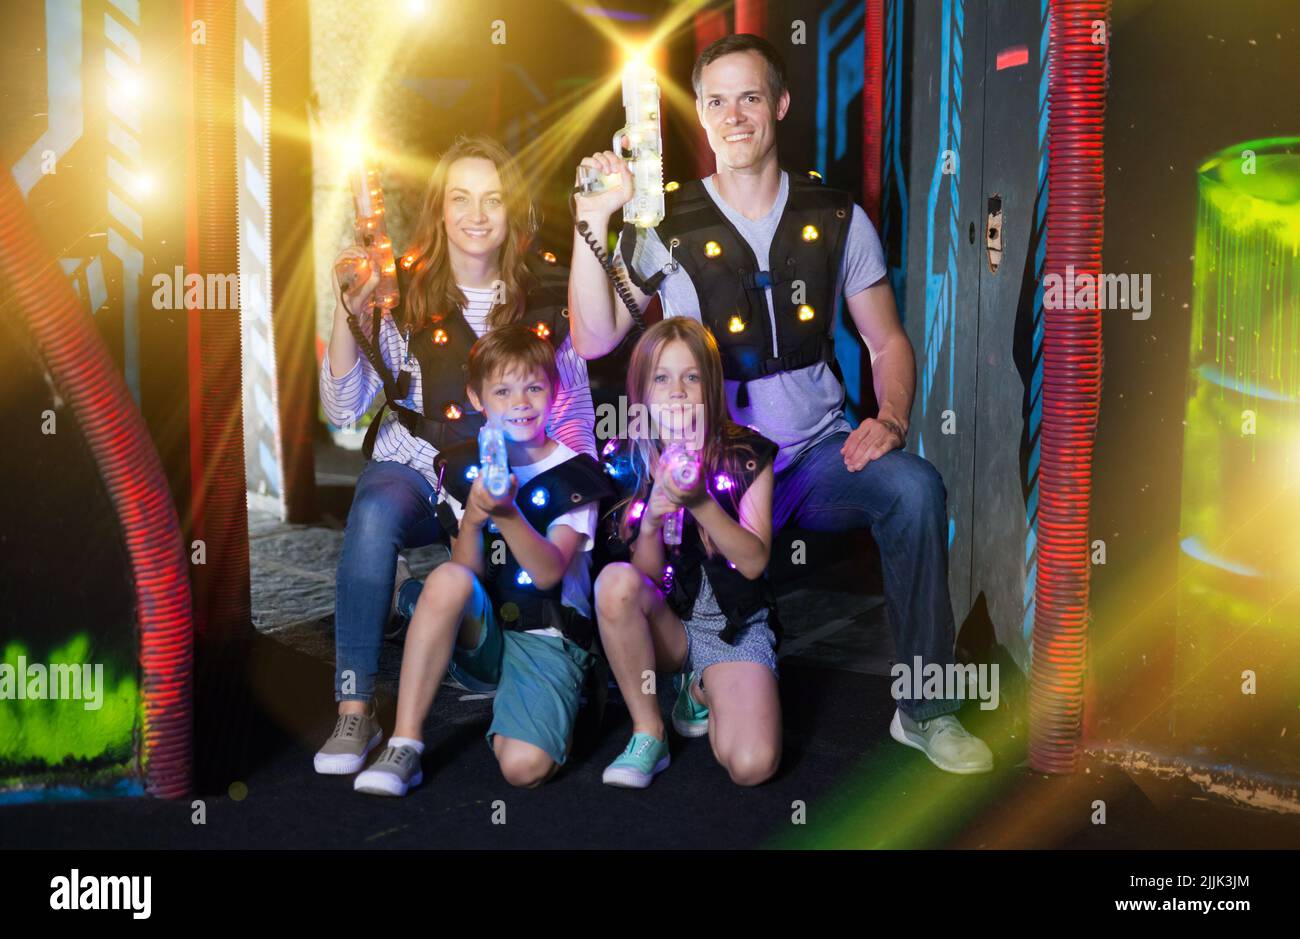 Kids and adults in beams on lasertag arena Stock Photo